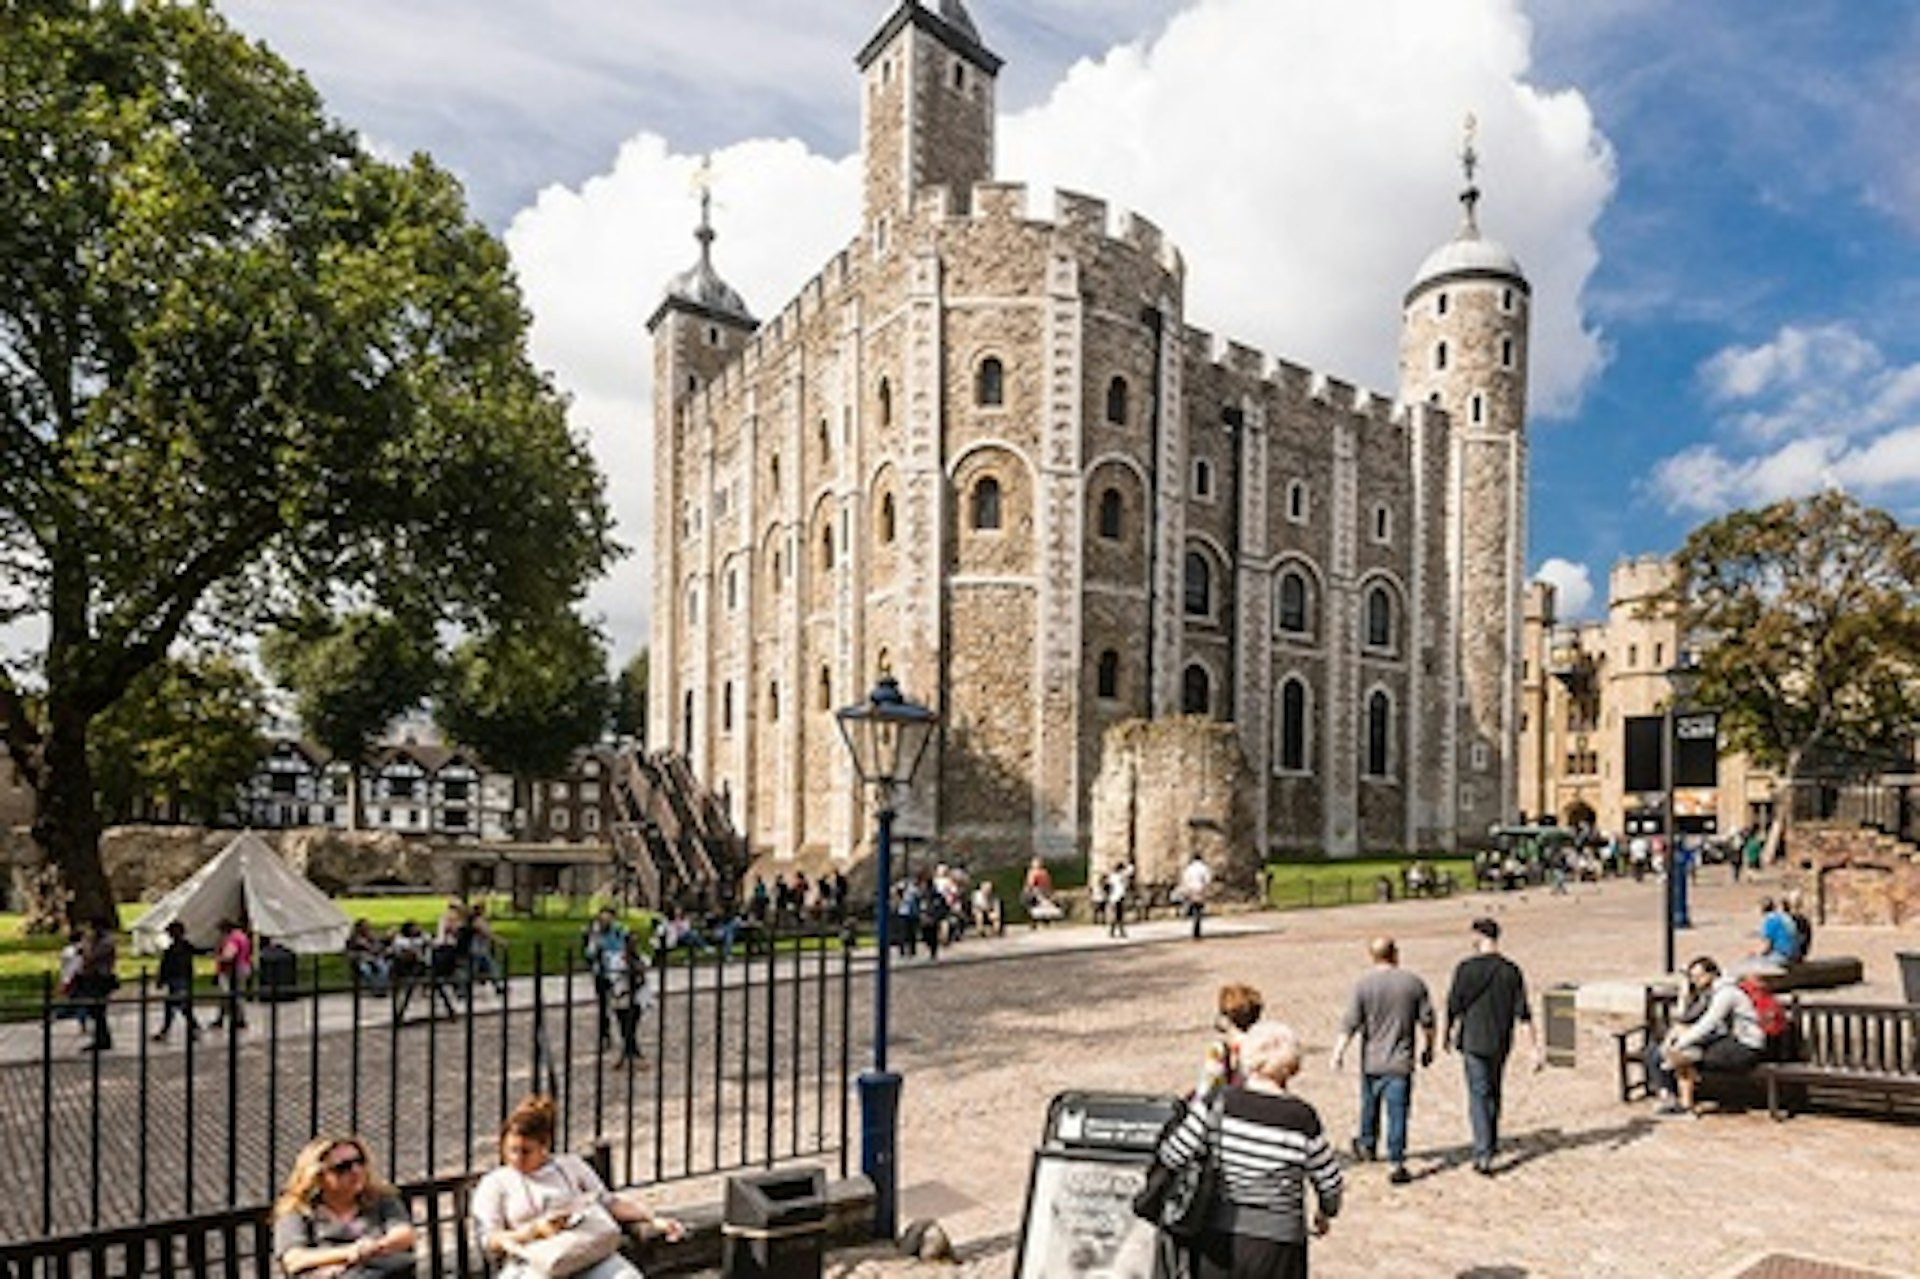 Visit the Tower of London and Two Course Meal with Wine at Brasserie Blanc for Two 3